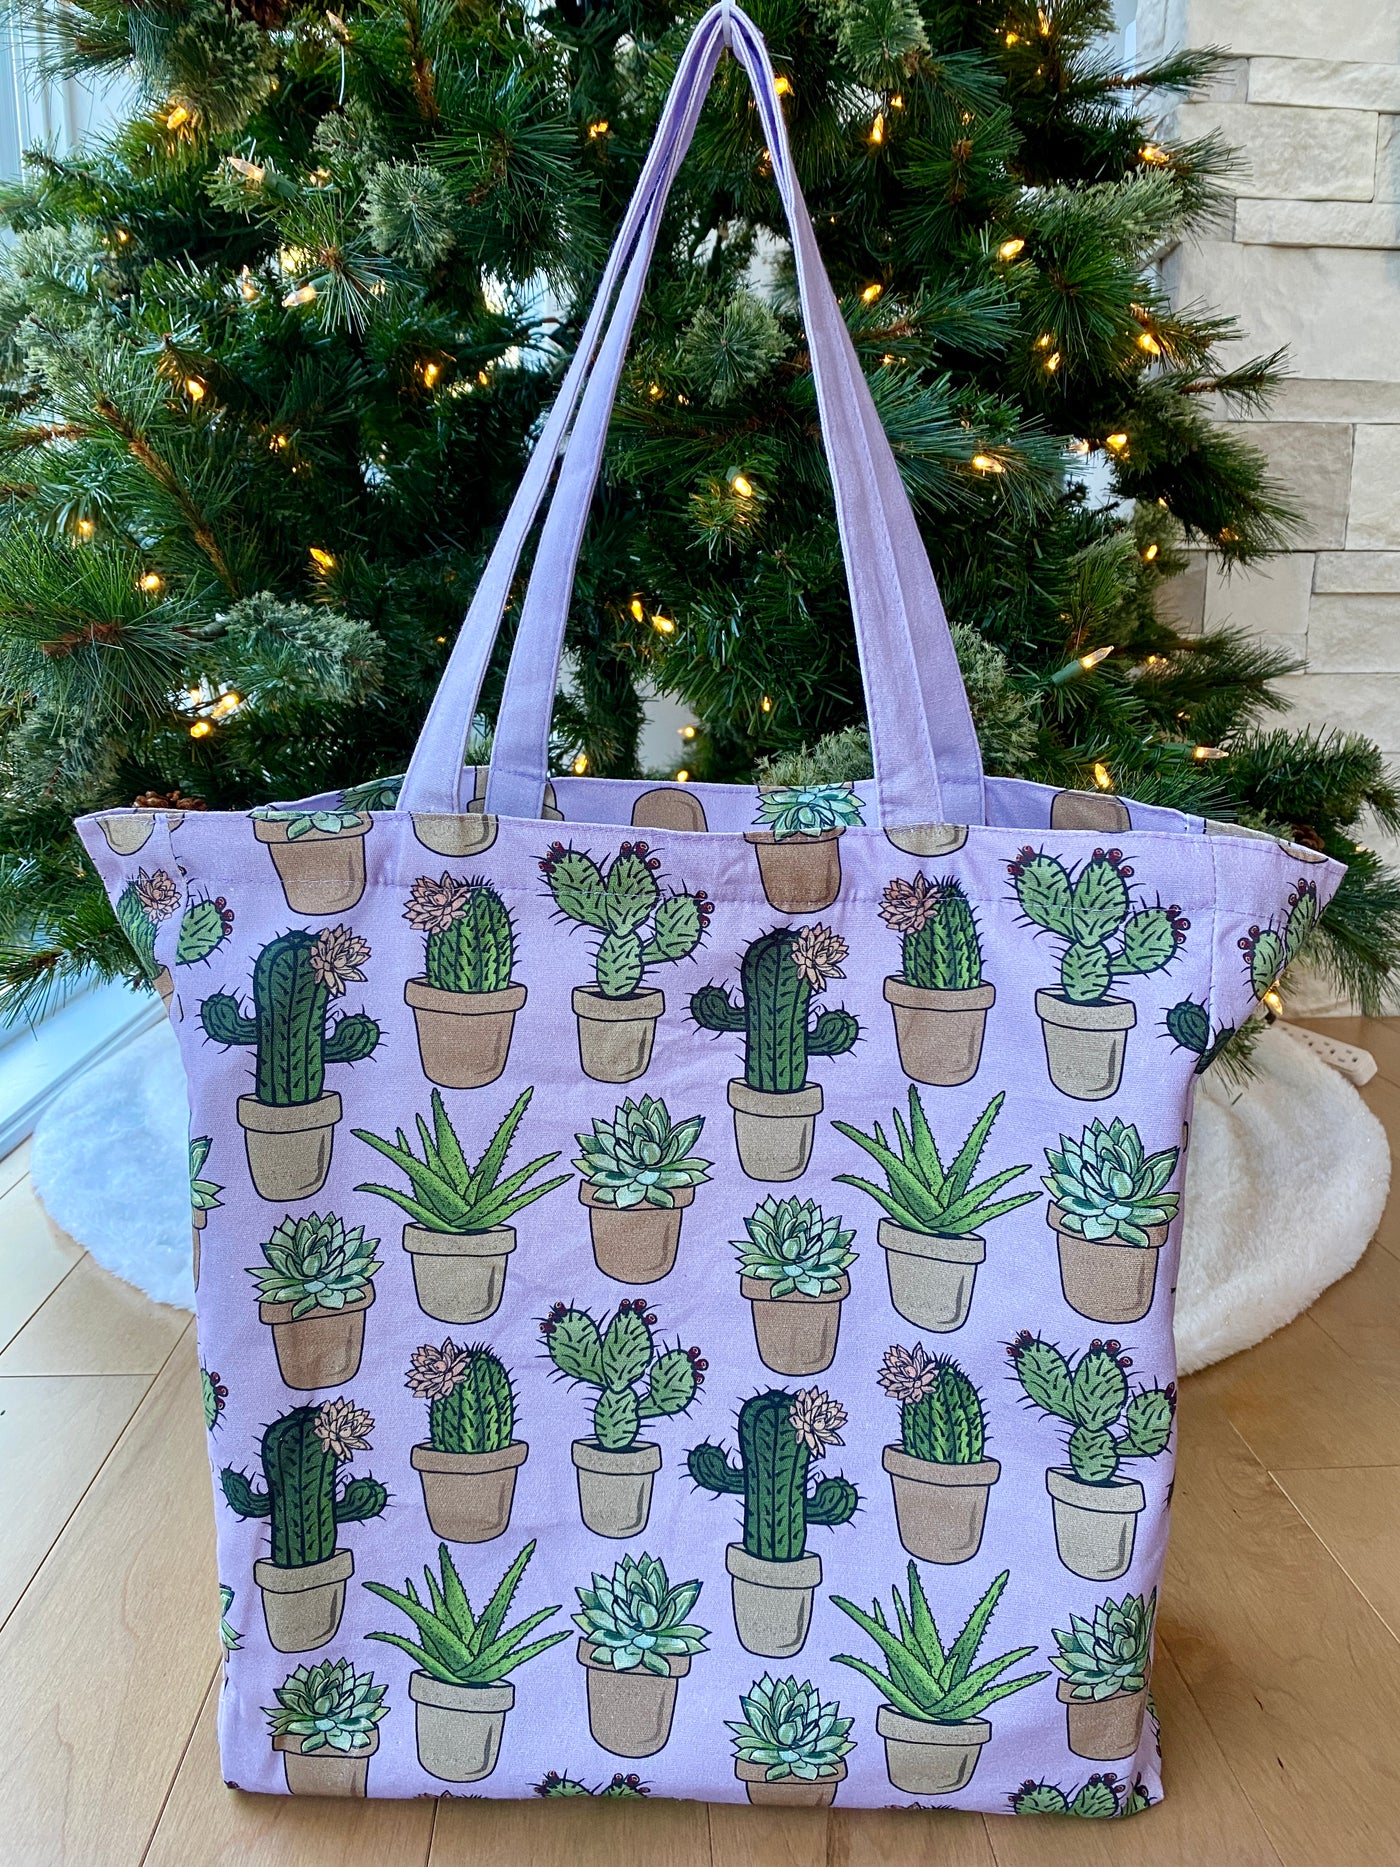 Illustrated Tote Bag: Beautiful Cactus and succulent plants